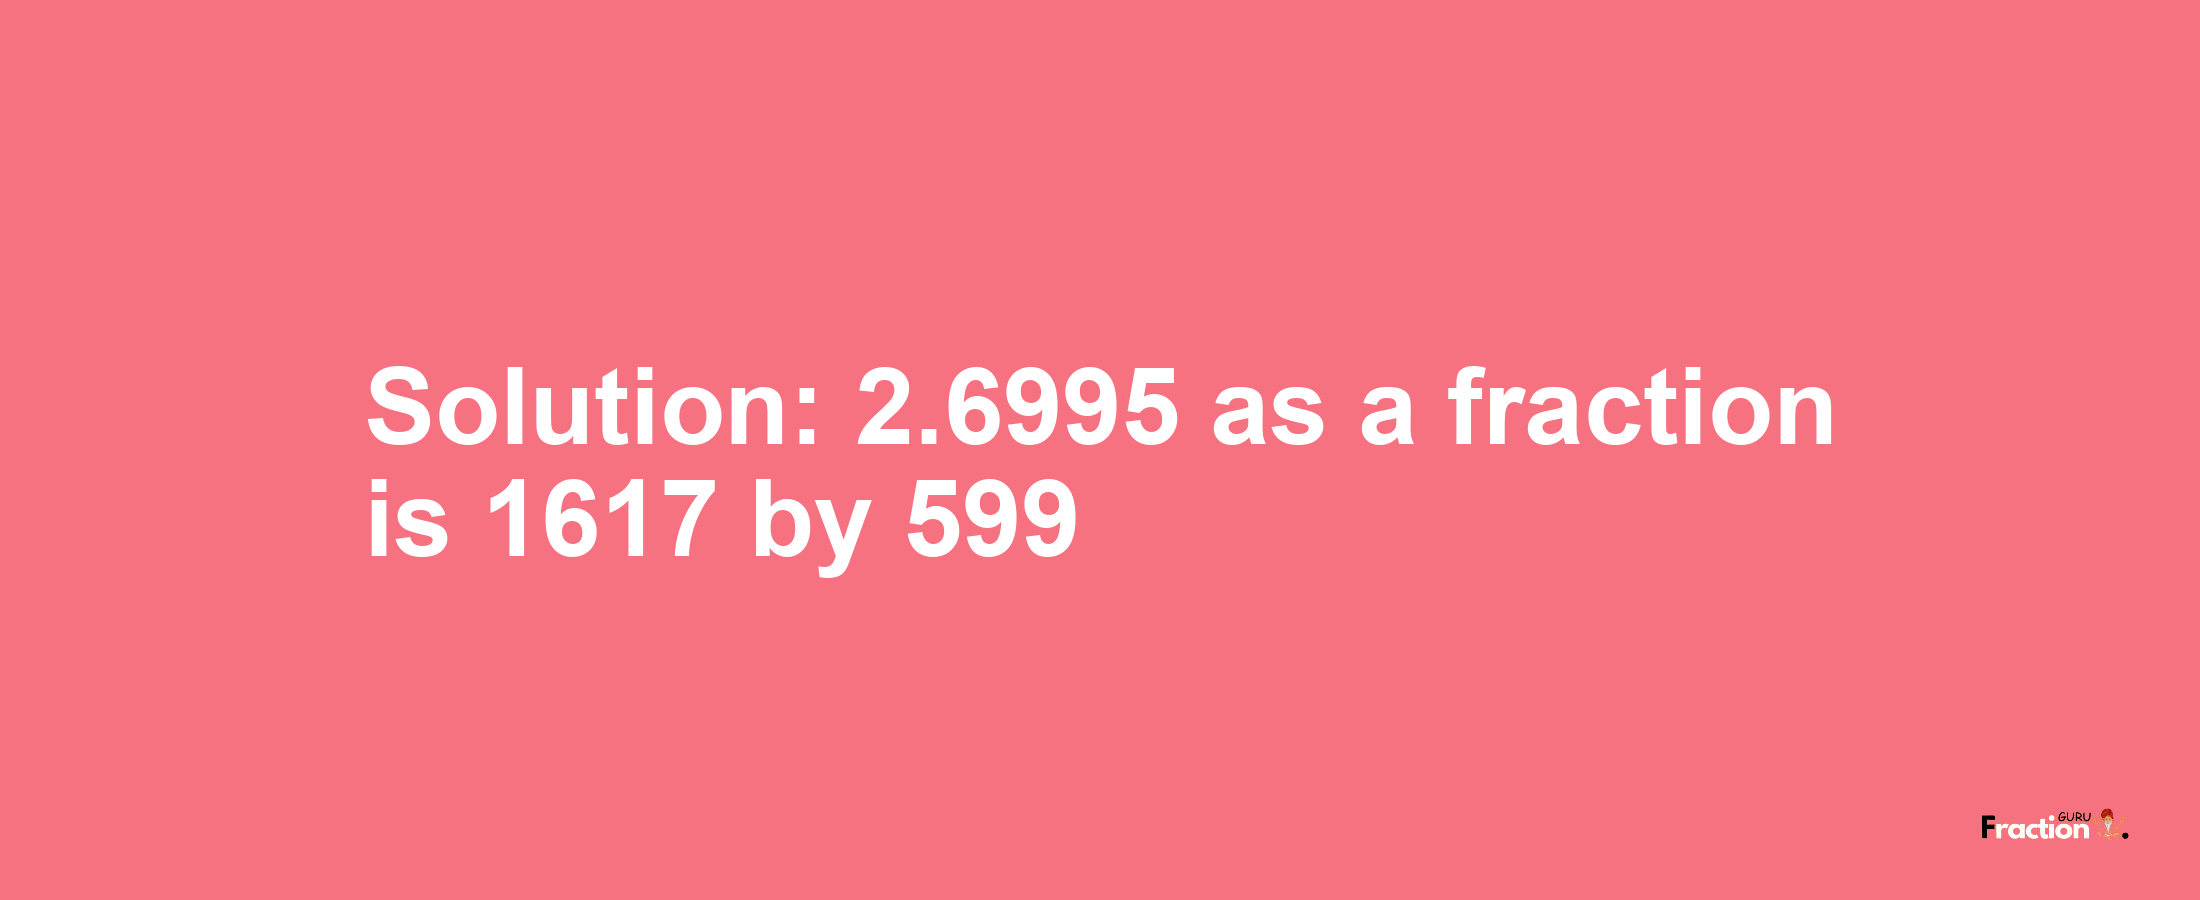 Solution:2.6995 as a fraction is 1617/599